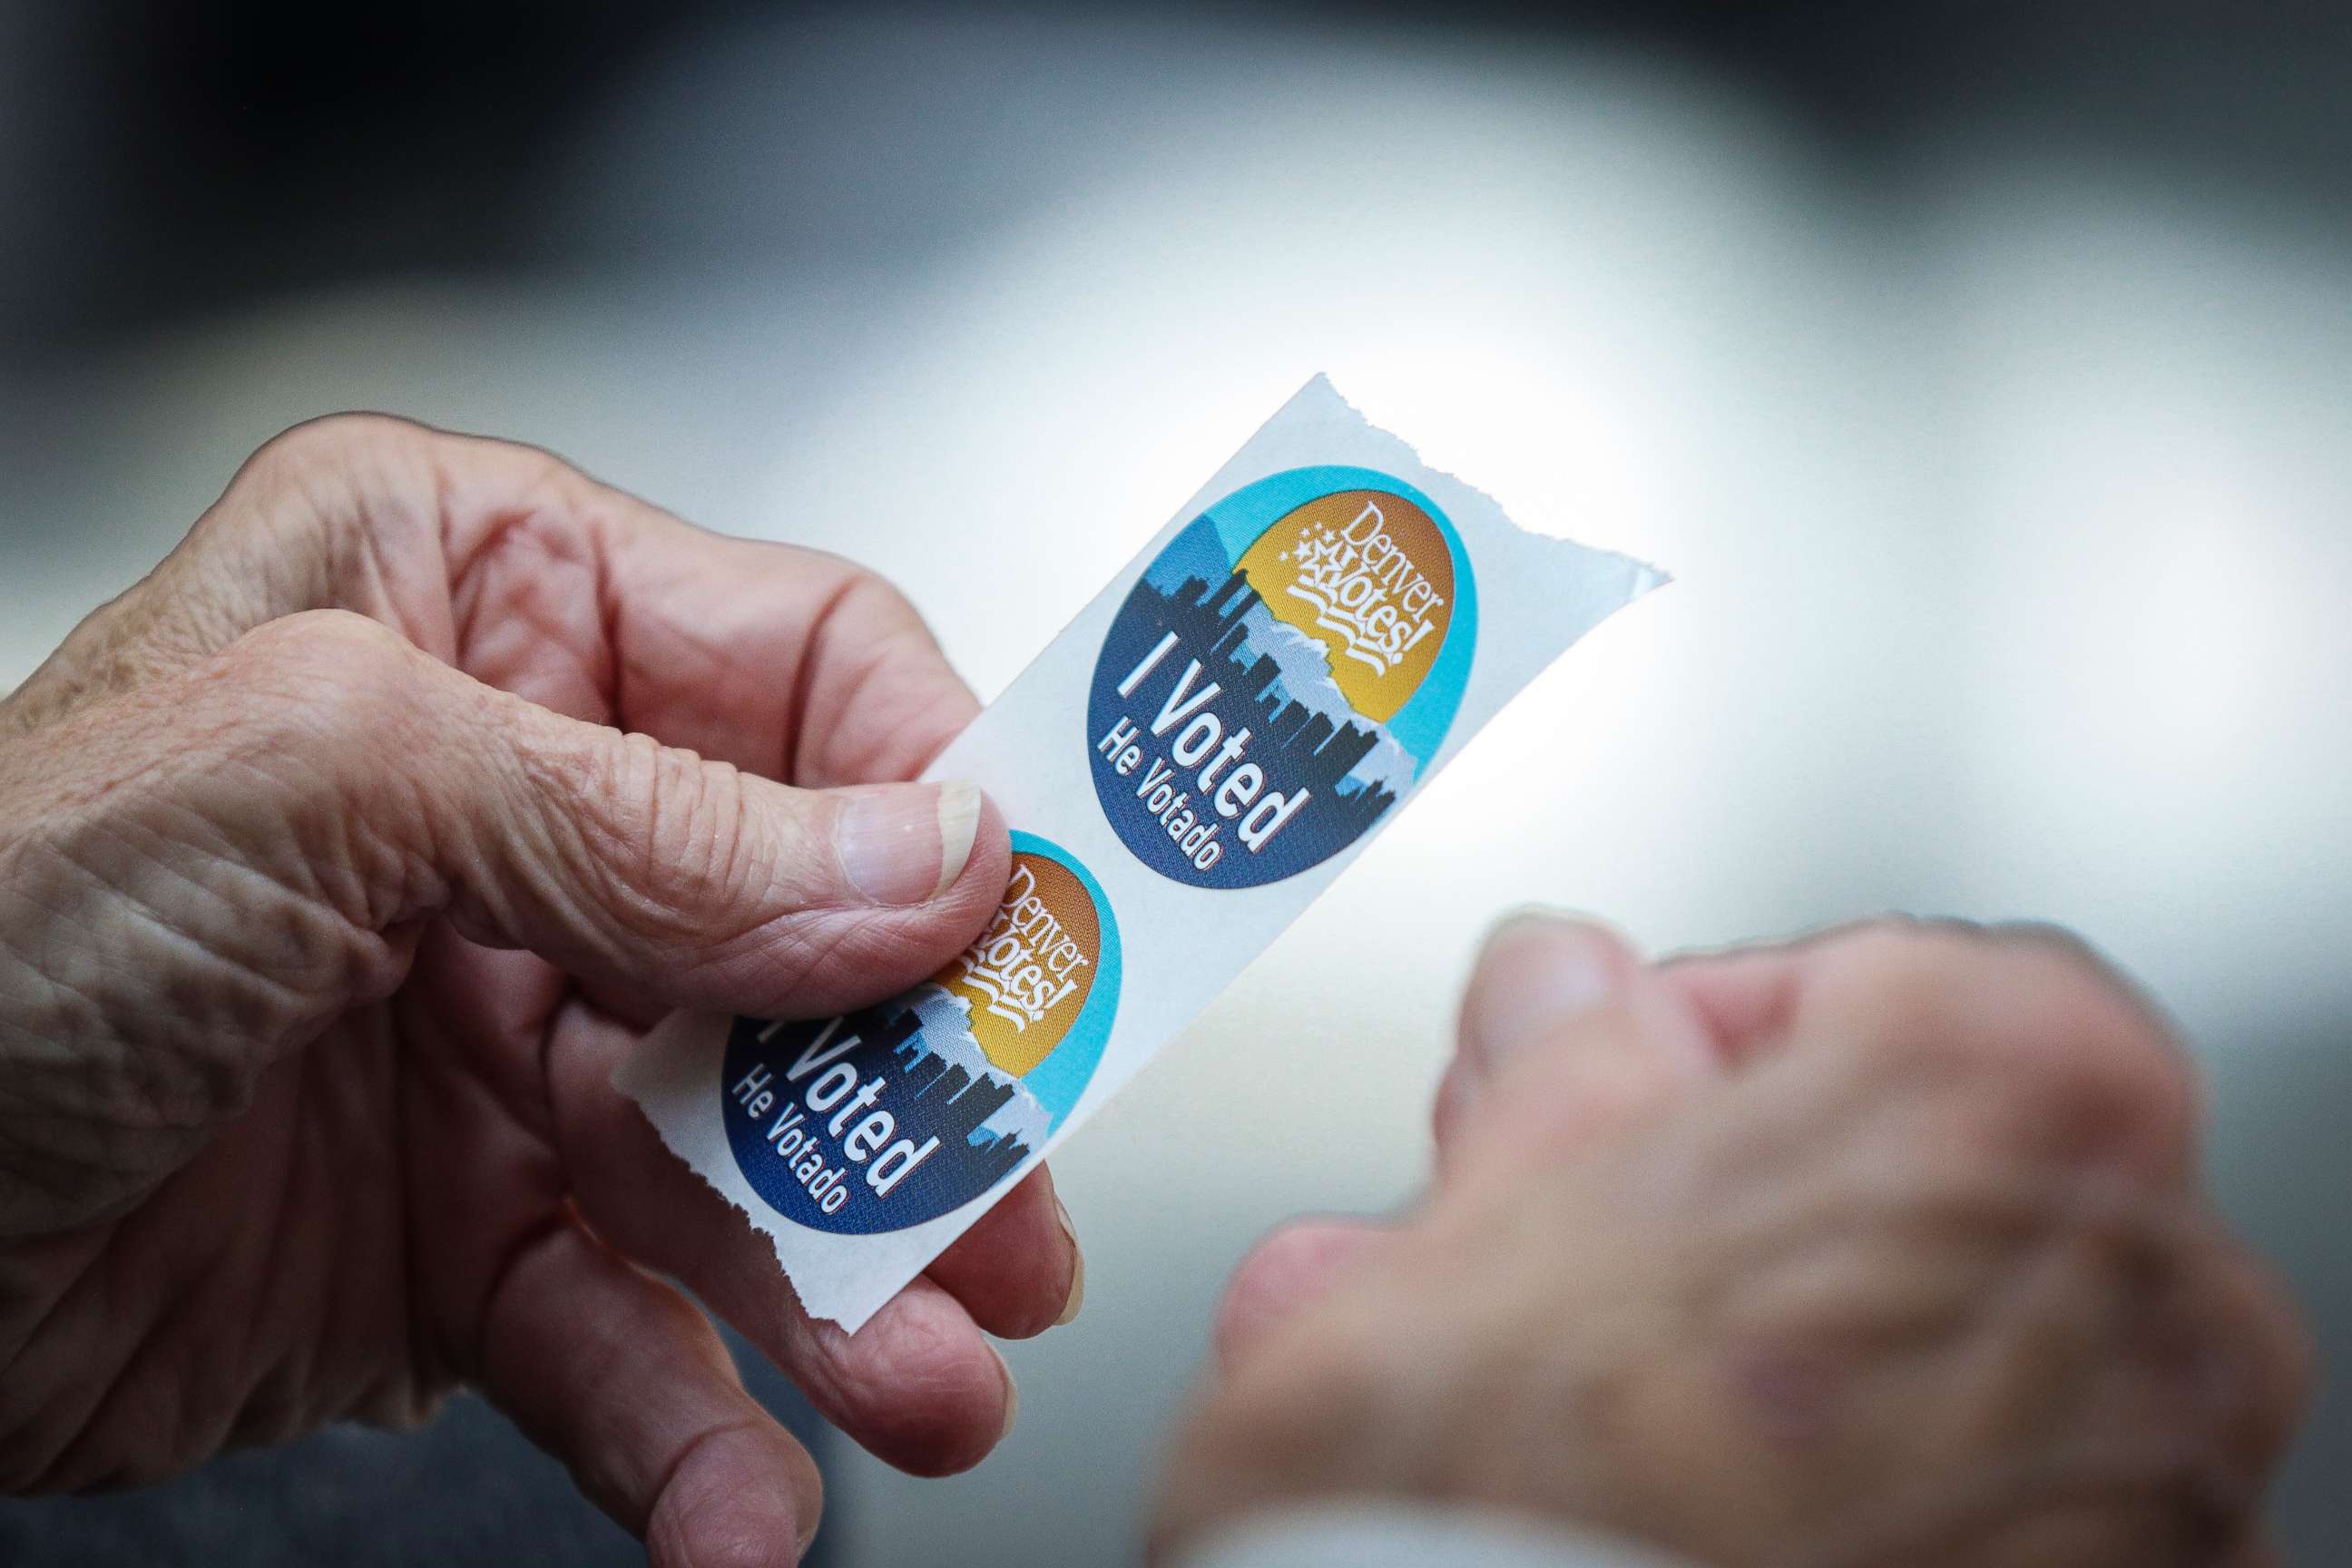 PHOTO: An election judge tears off a couple of "I Voted" stickers to hand to a voter as people cast their ballots in the State Primaries on June 28, 2022 at the Wellington E. Webb Municipal Office Building in Denver.